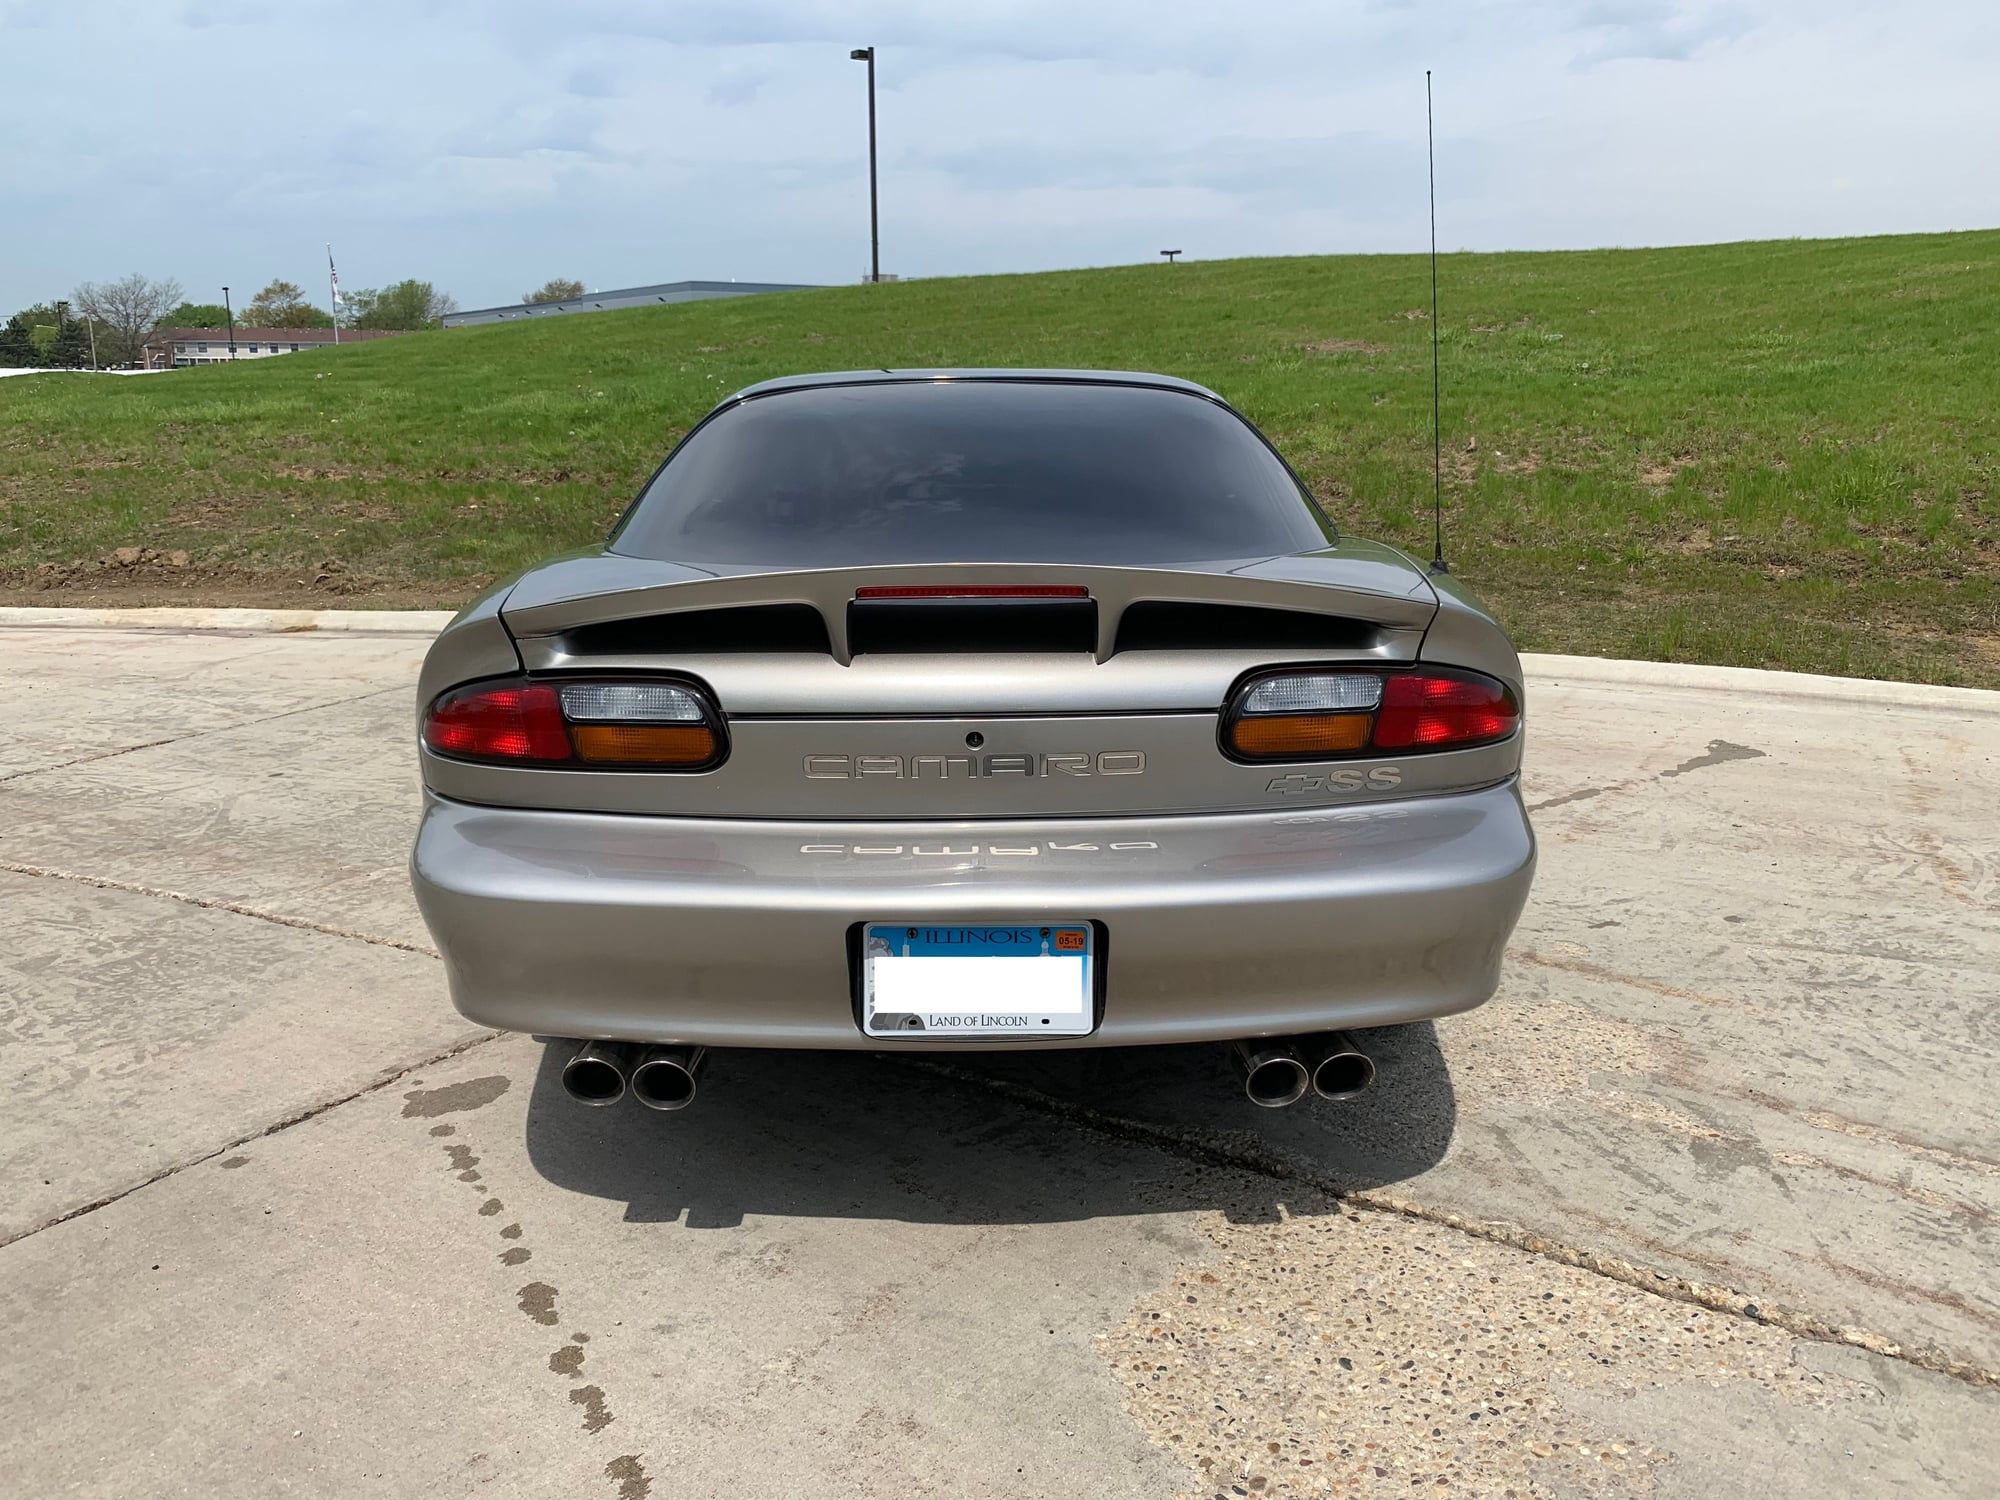 2001 Chevrolet Camaro - 2001 Camaro SS 6M Only 29K Miles! - Used - VIN 2G1FP22G612101841 - 29,800 Miles - 8 cyl - 2WD - Manual - Coupe - Other - Gurnee, IL 60031, United States